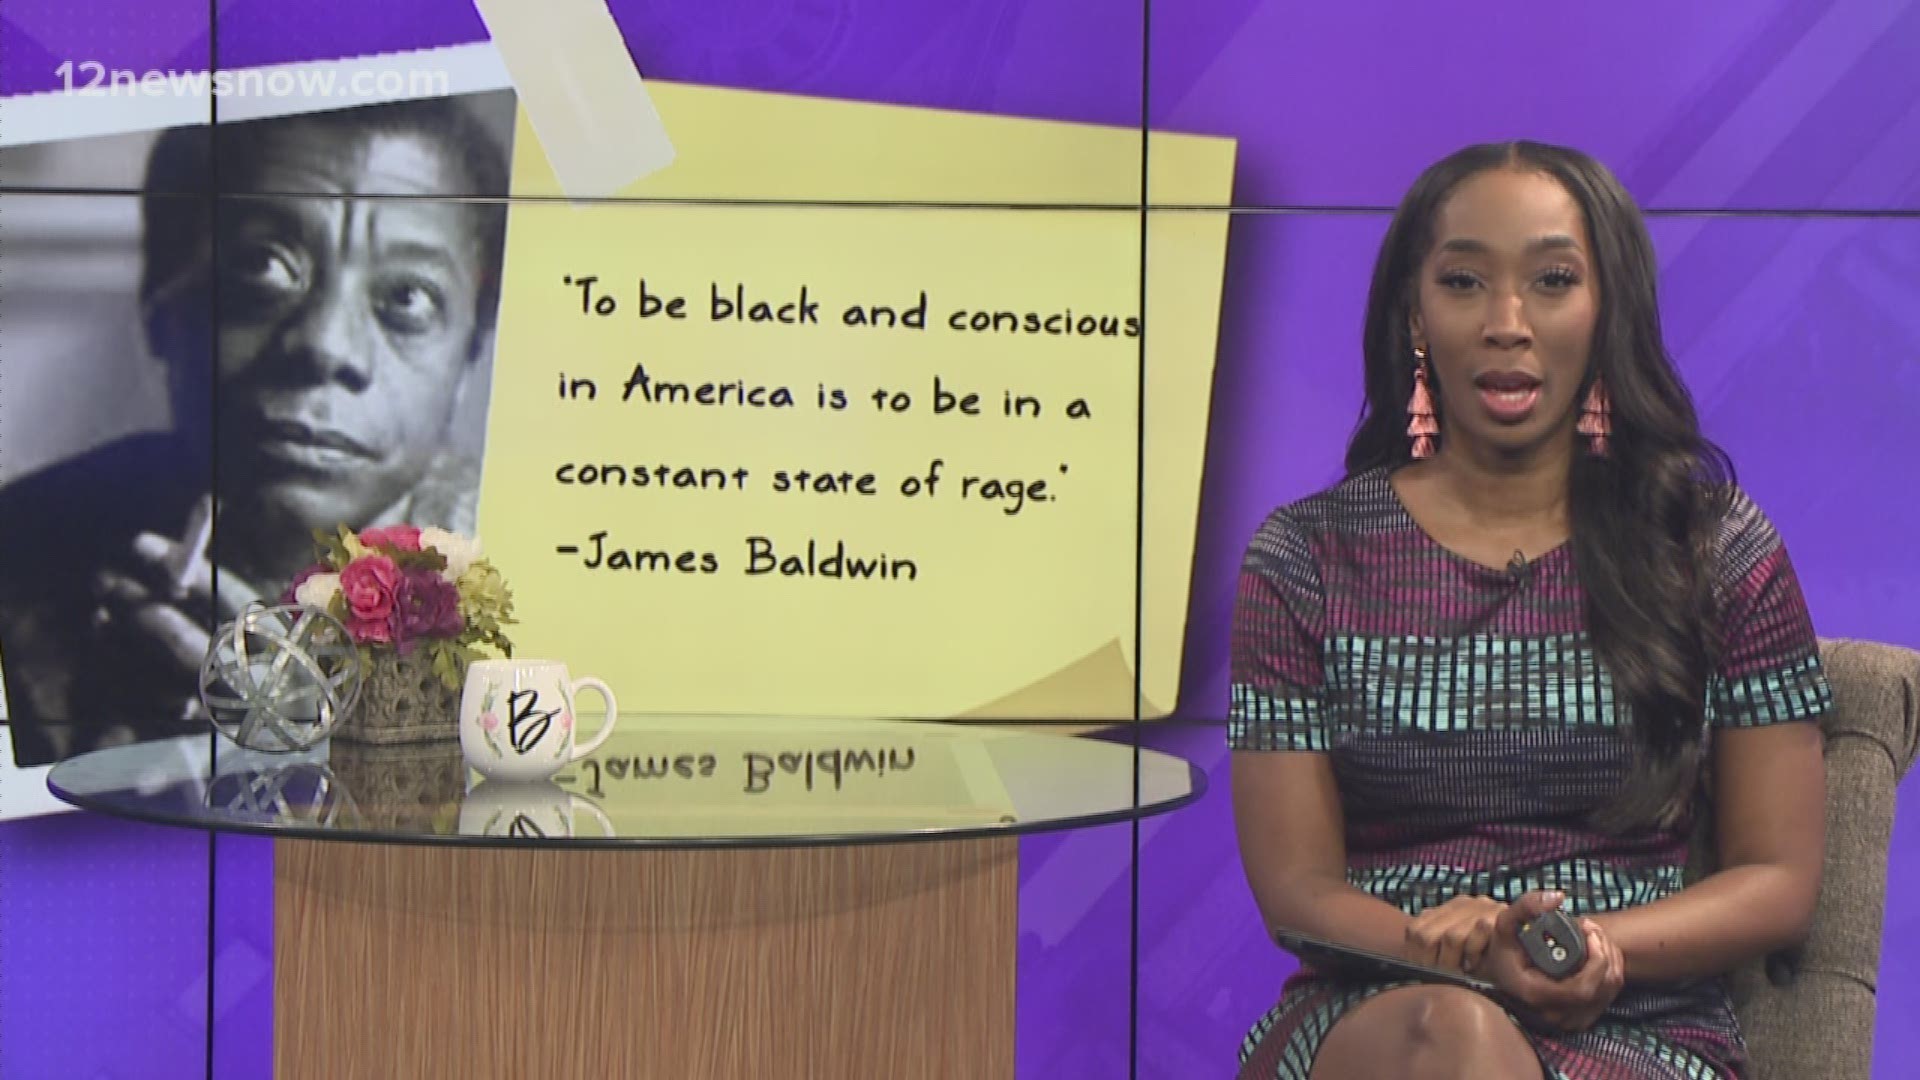 “To be black and conscious in America is to be in a constant state of rage.” -James Baldwin